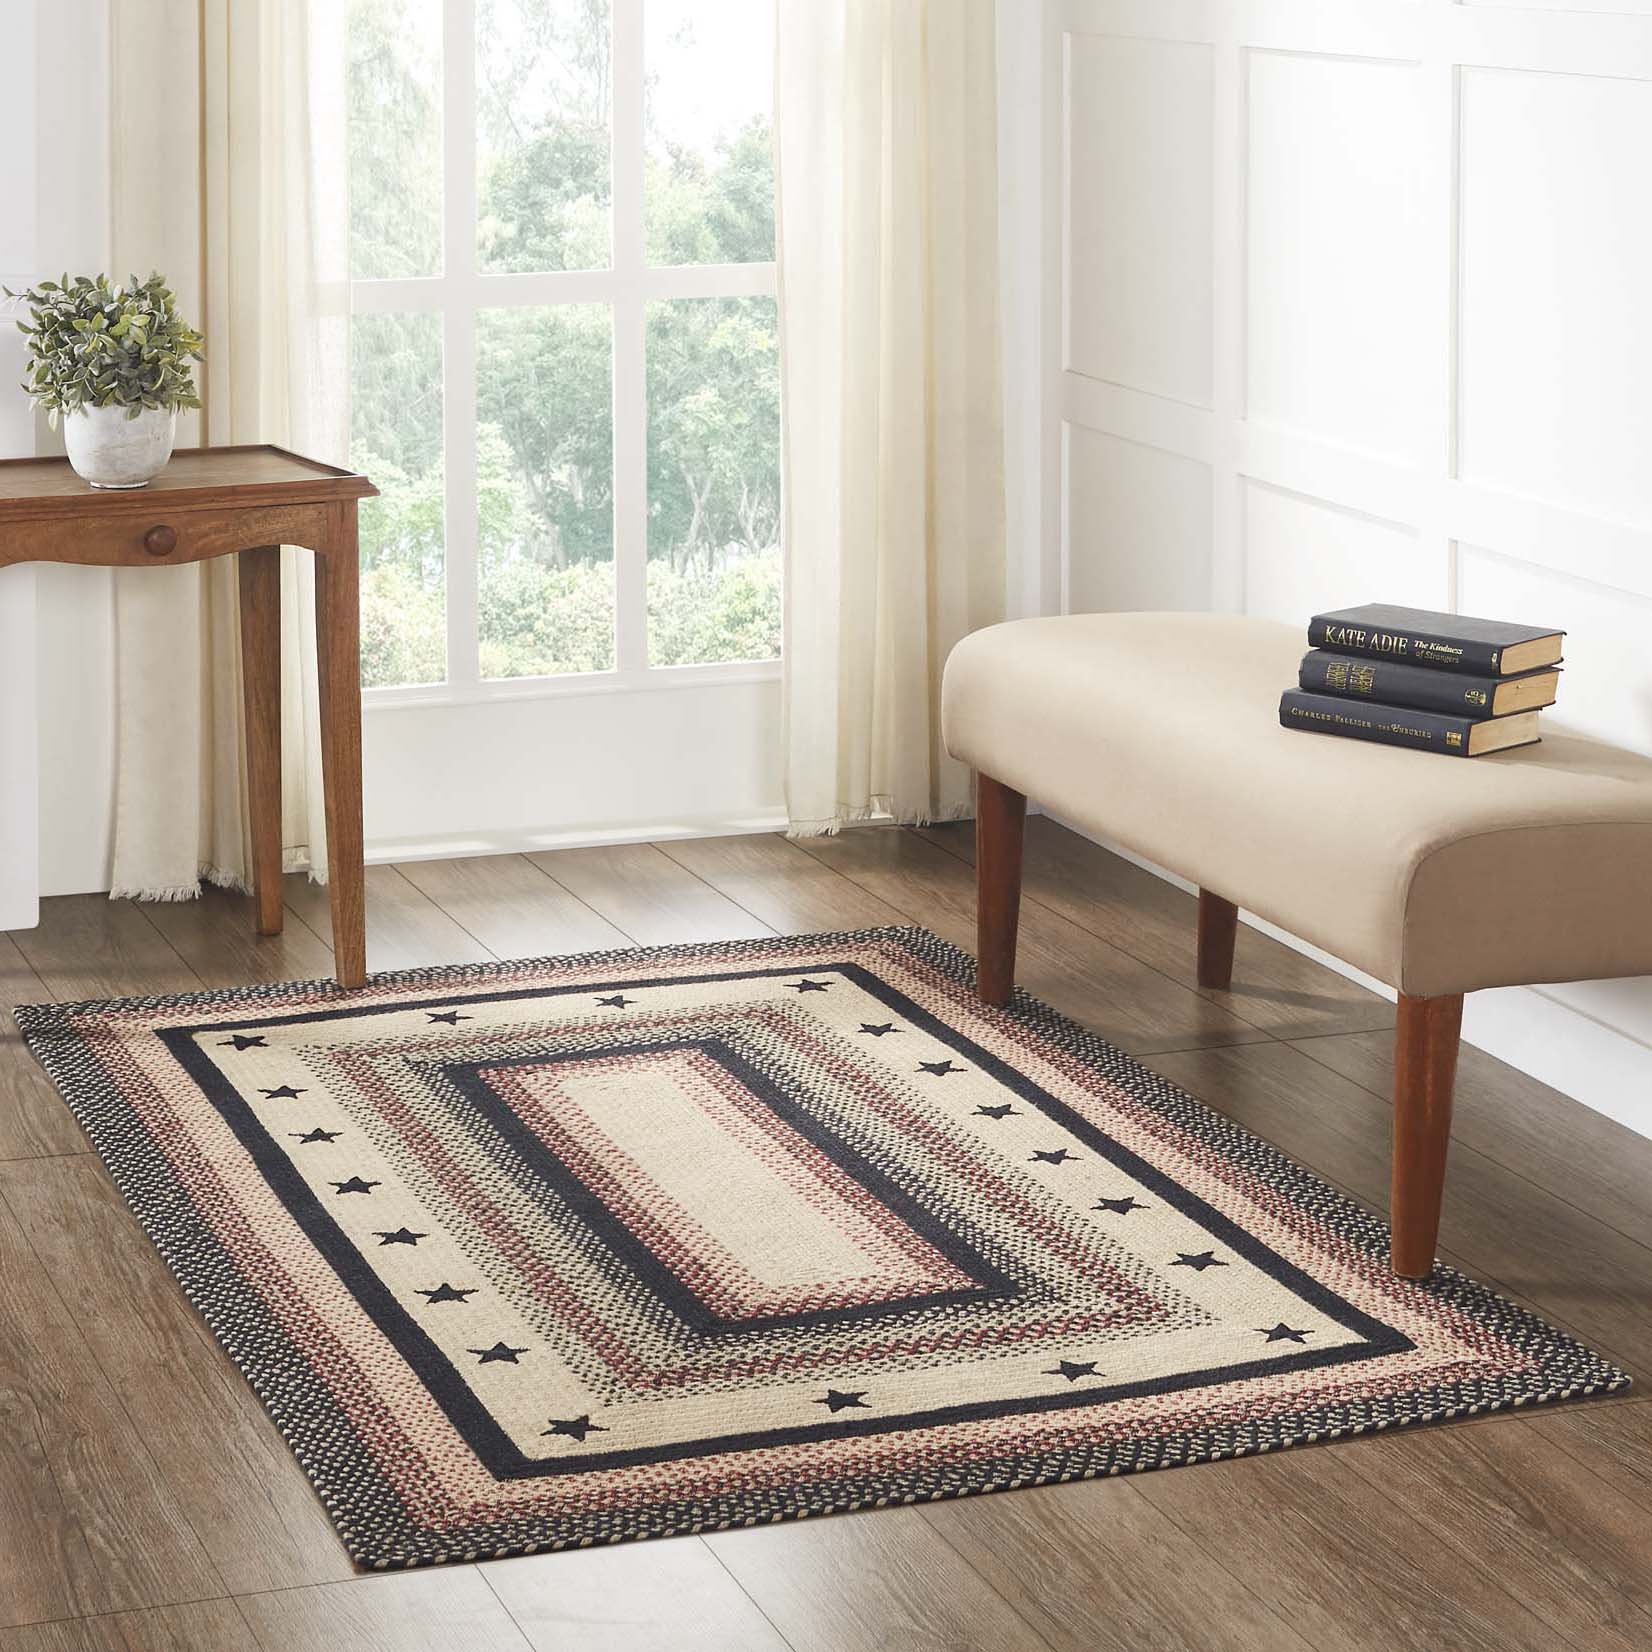 Colonial Star Jute Braided Rug Rect with Rug Pad 4'x6' VHC Brands